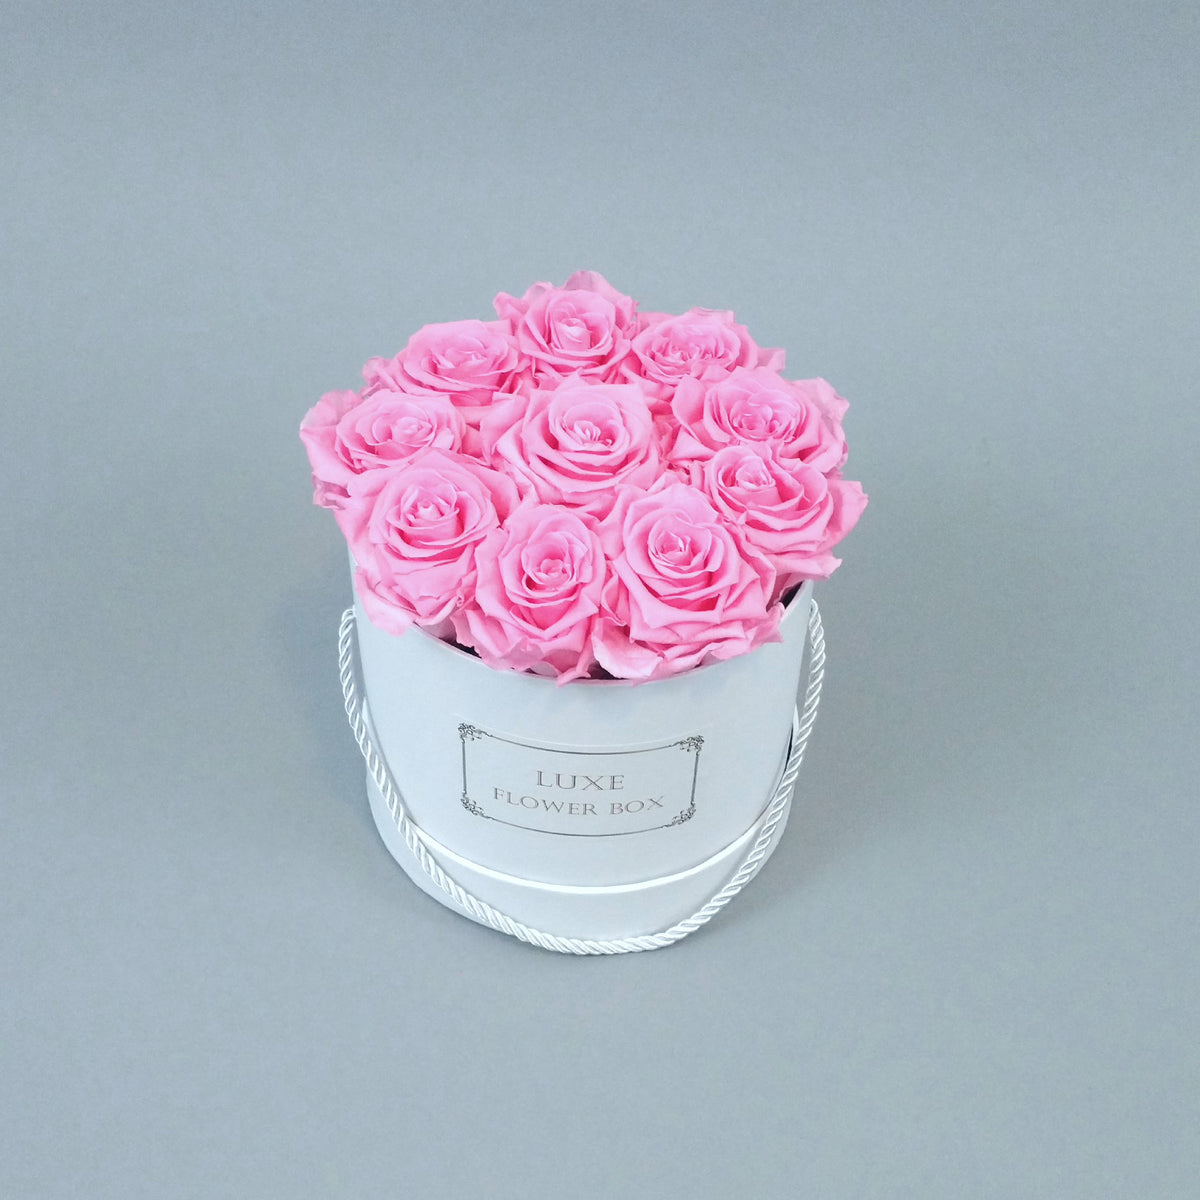 Small Round Box - Customize it! - Last more than 1 year